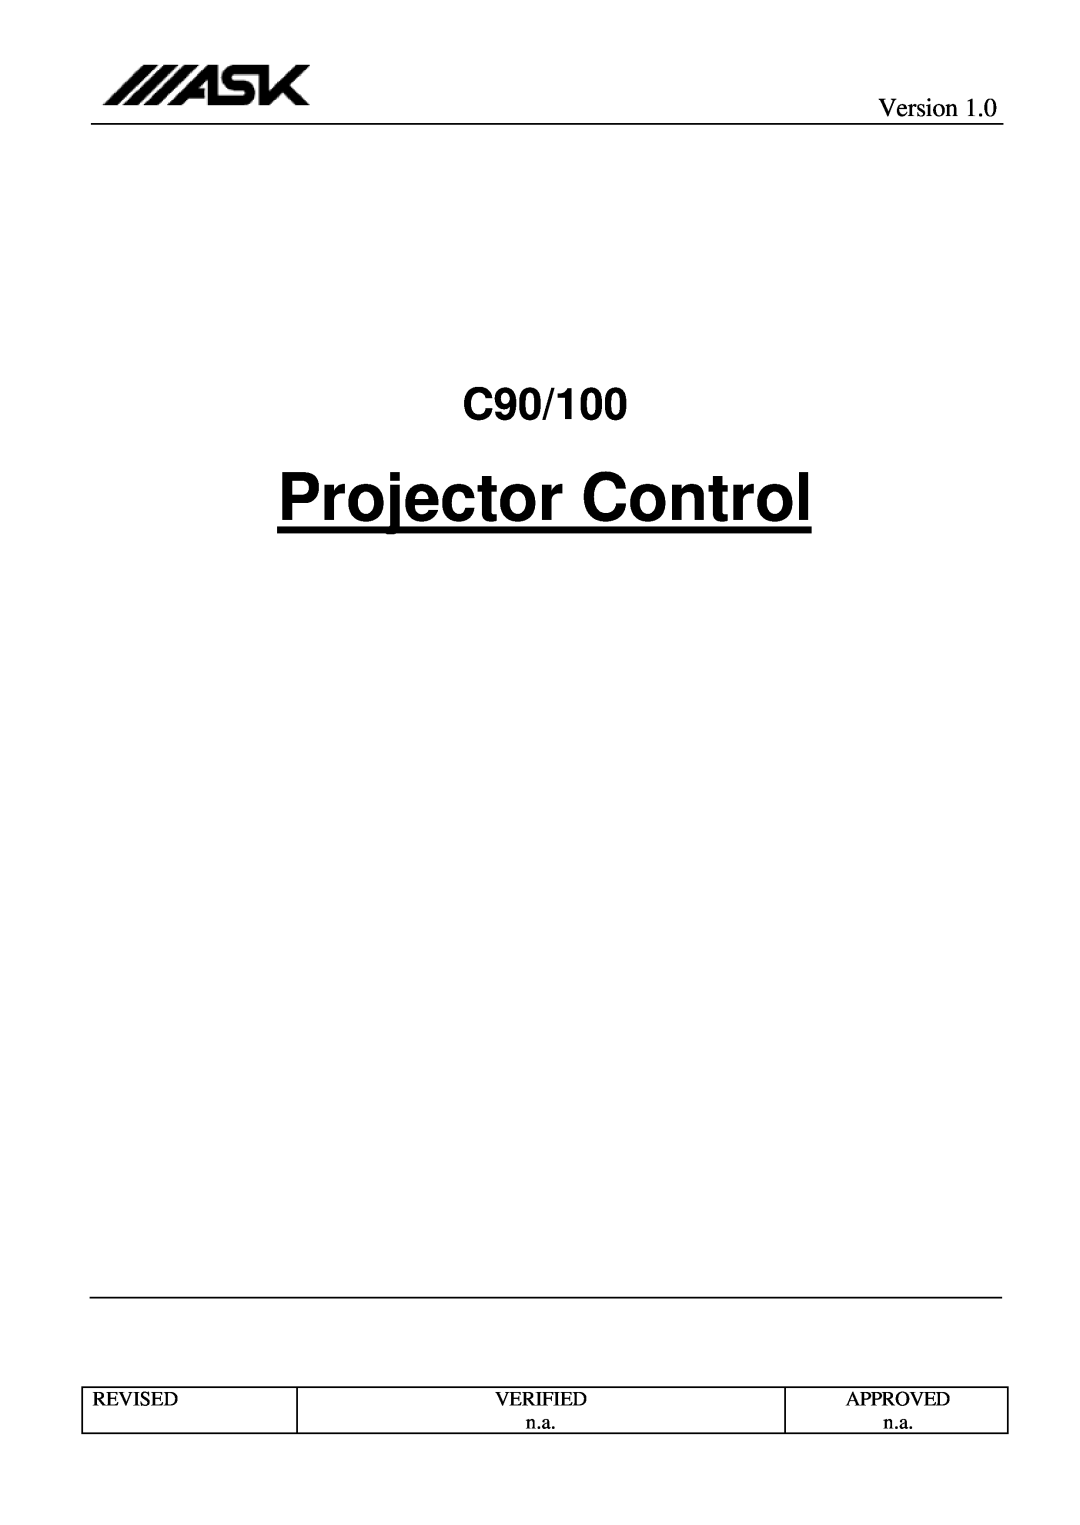 Ask Proxima C100 manual Projector Control, C90/100, Version, Revised, VERIFIED n.a, APPROVED n.a 